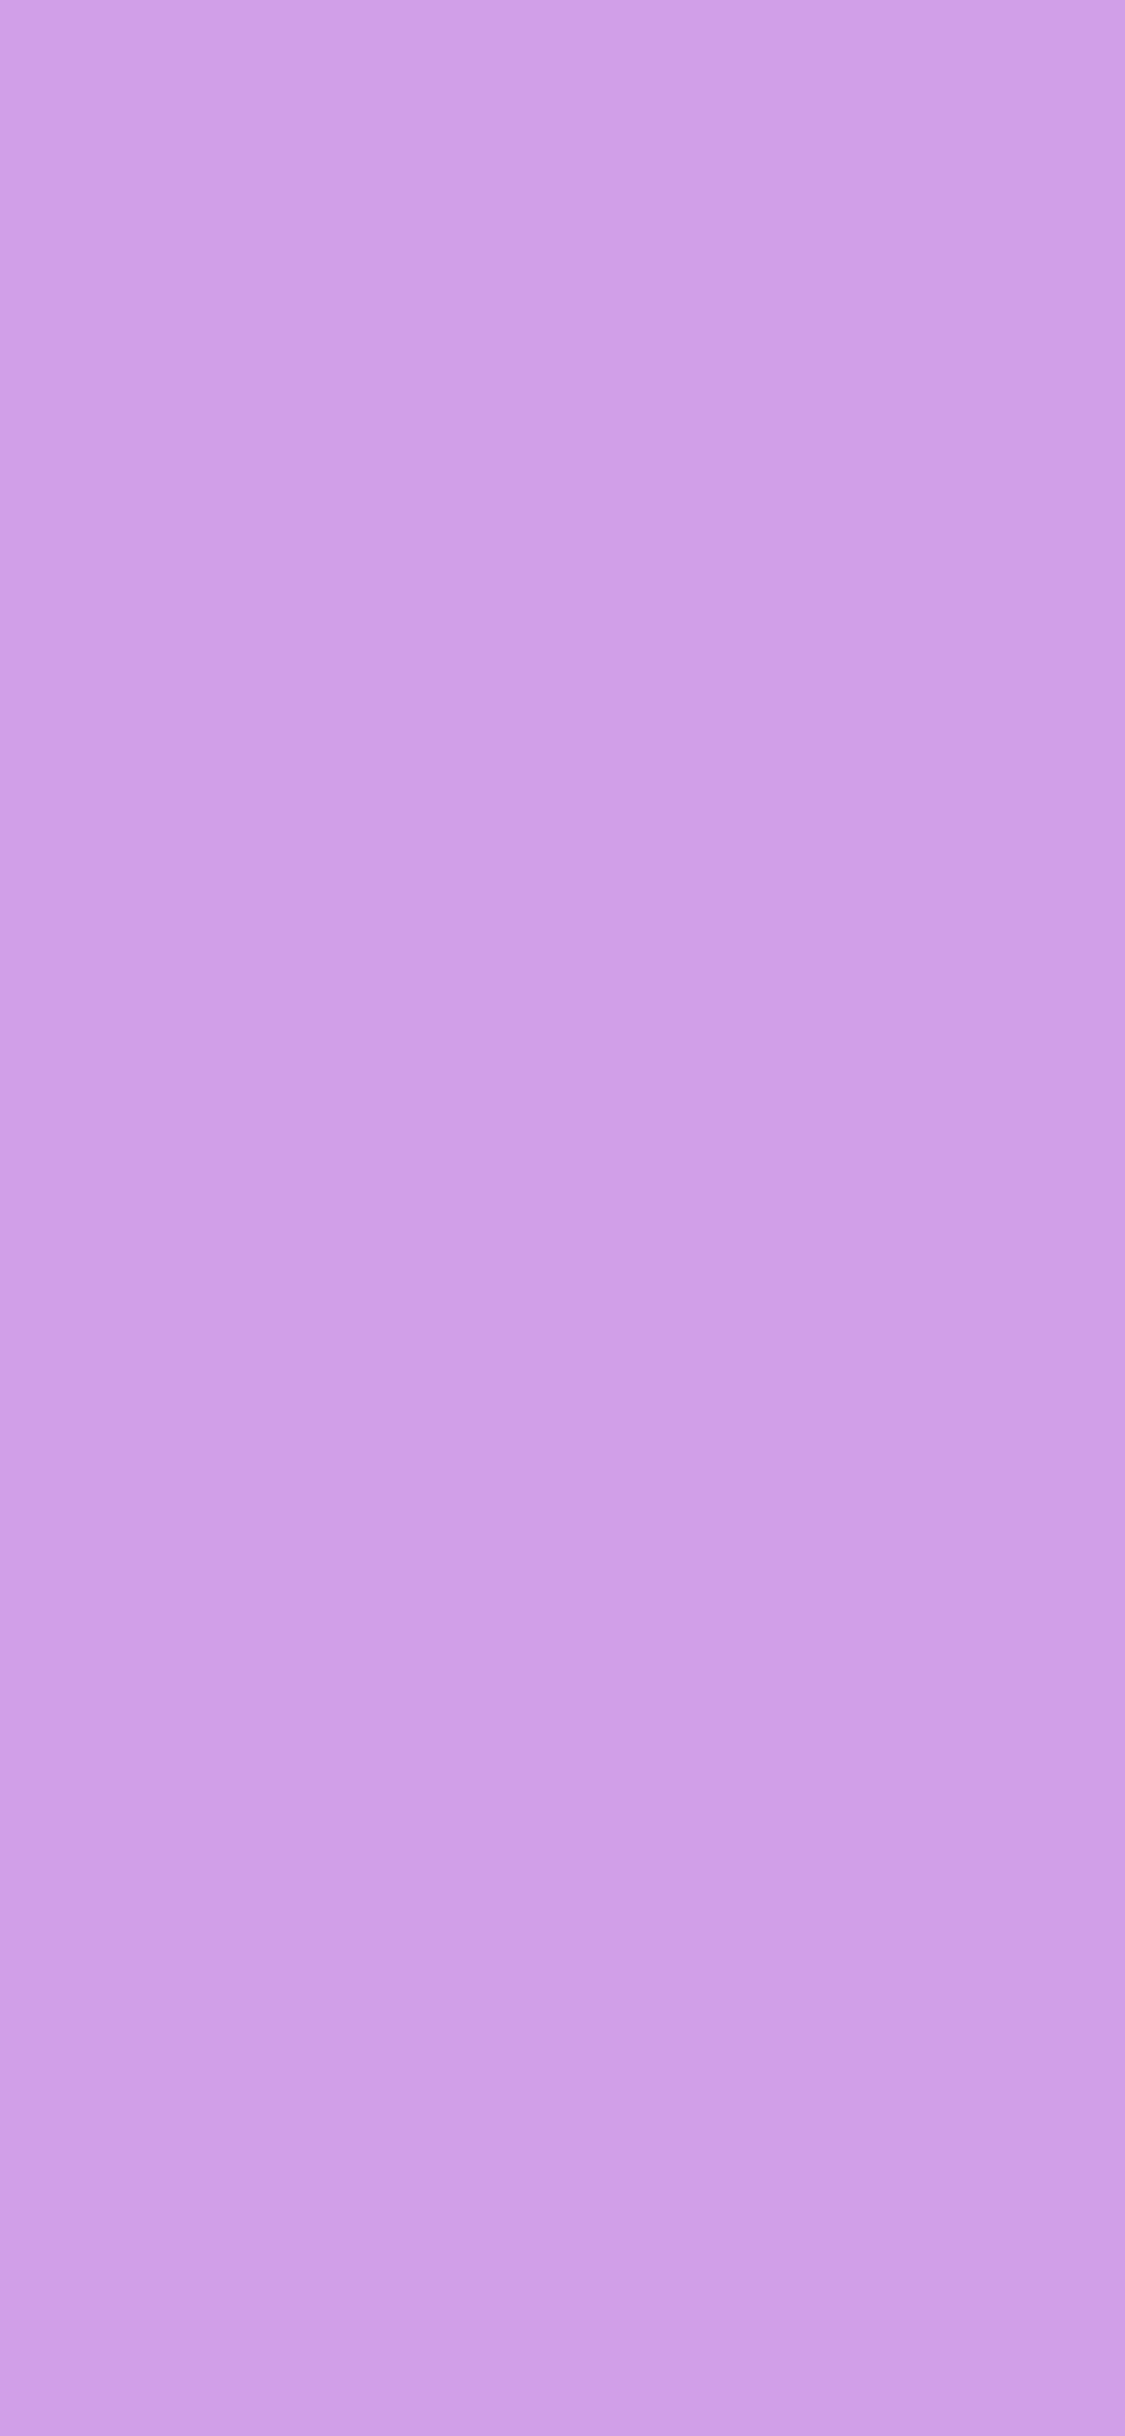 1125x2436 Bright Ube Solid Color Background